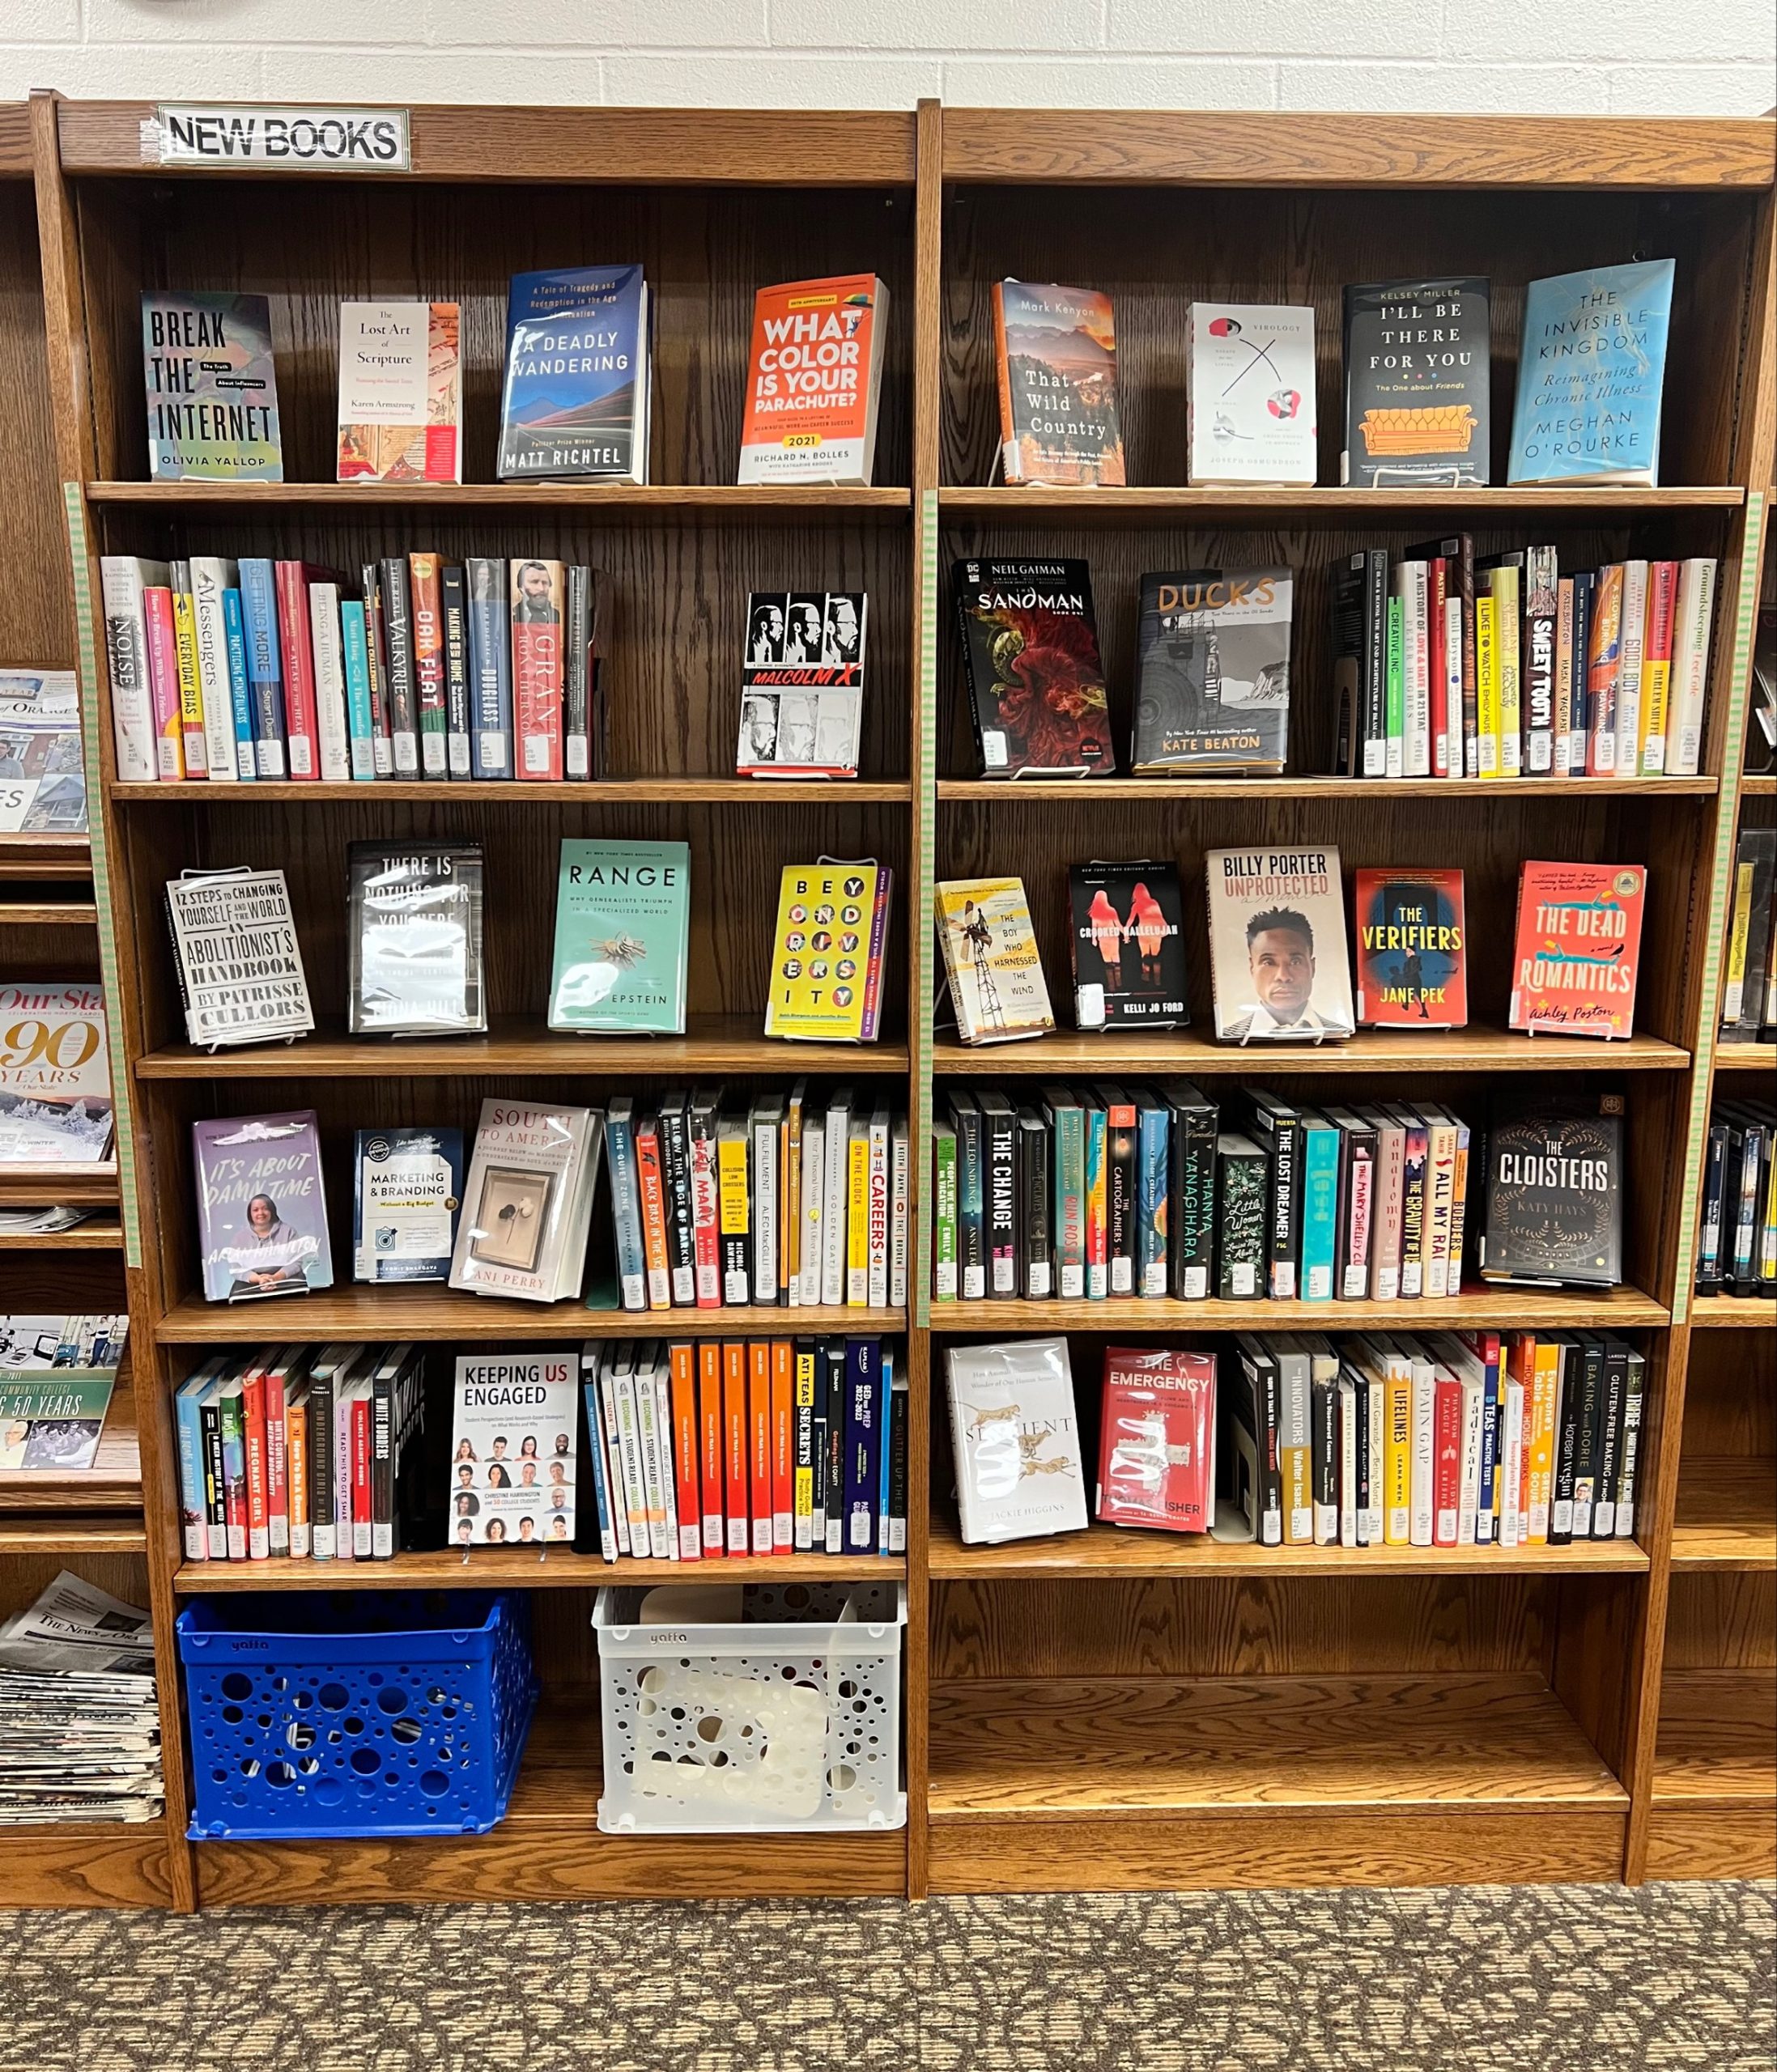 New Books shelves at the Orange County Campus Library, Jan. 2023